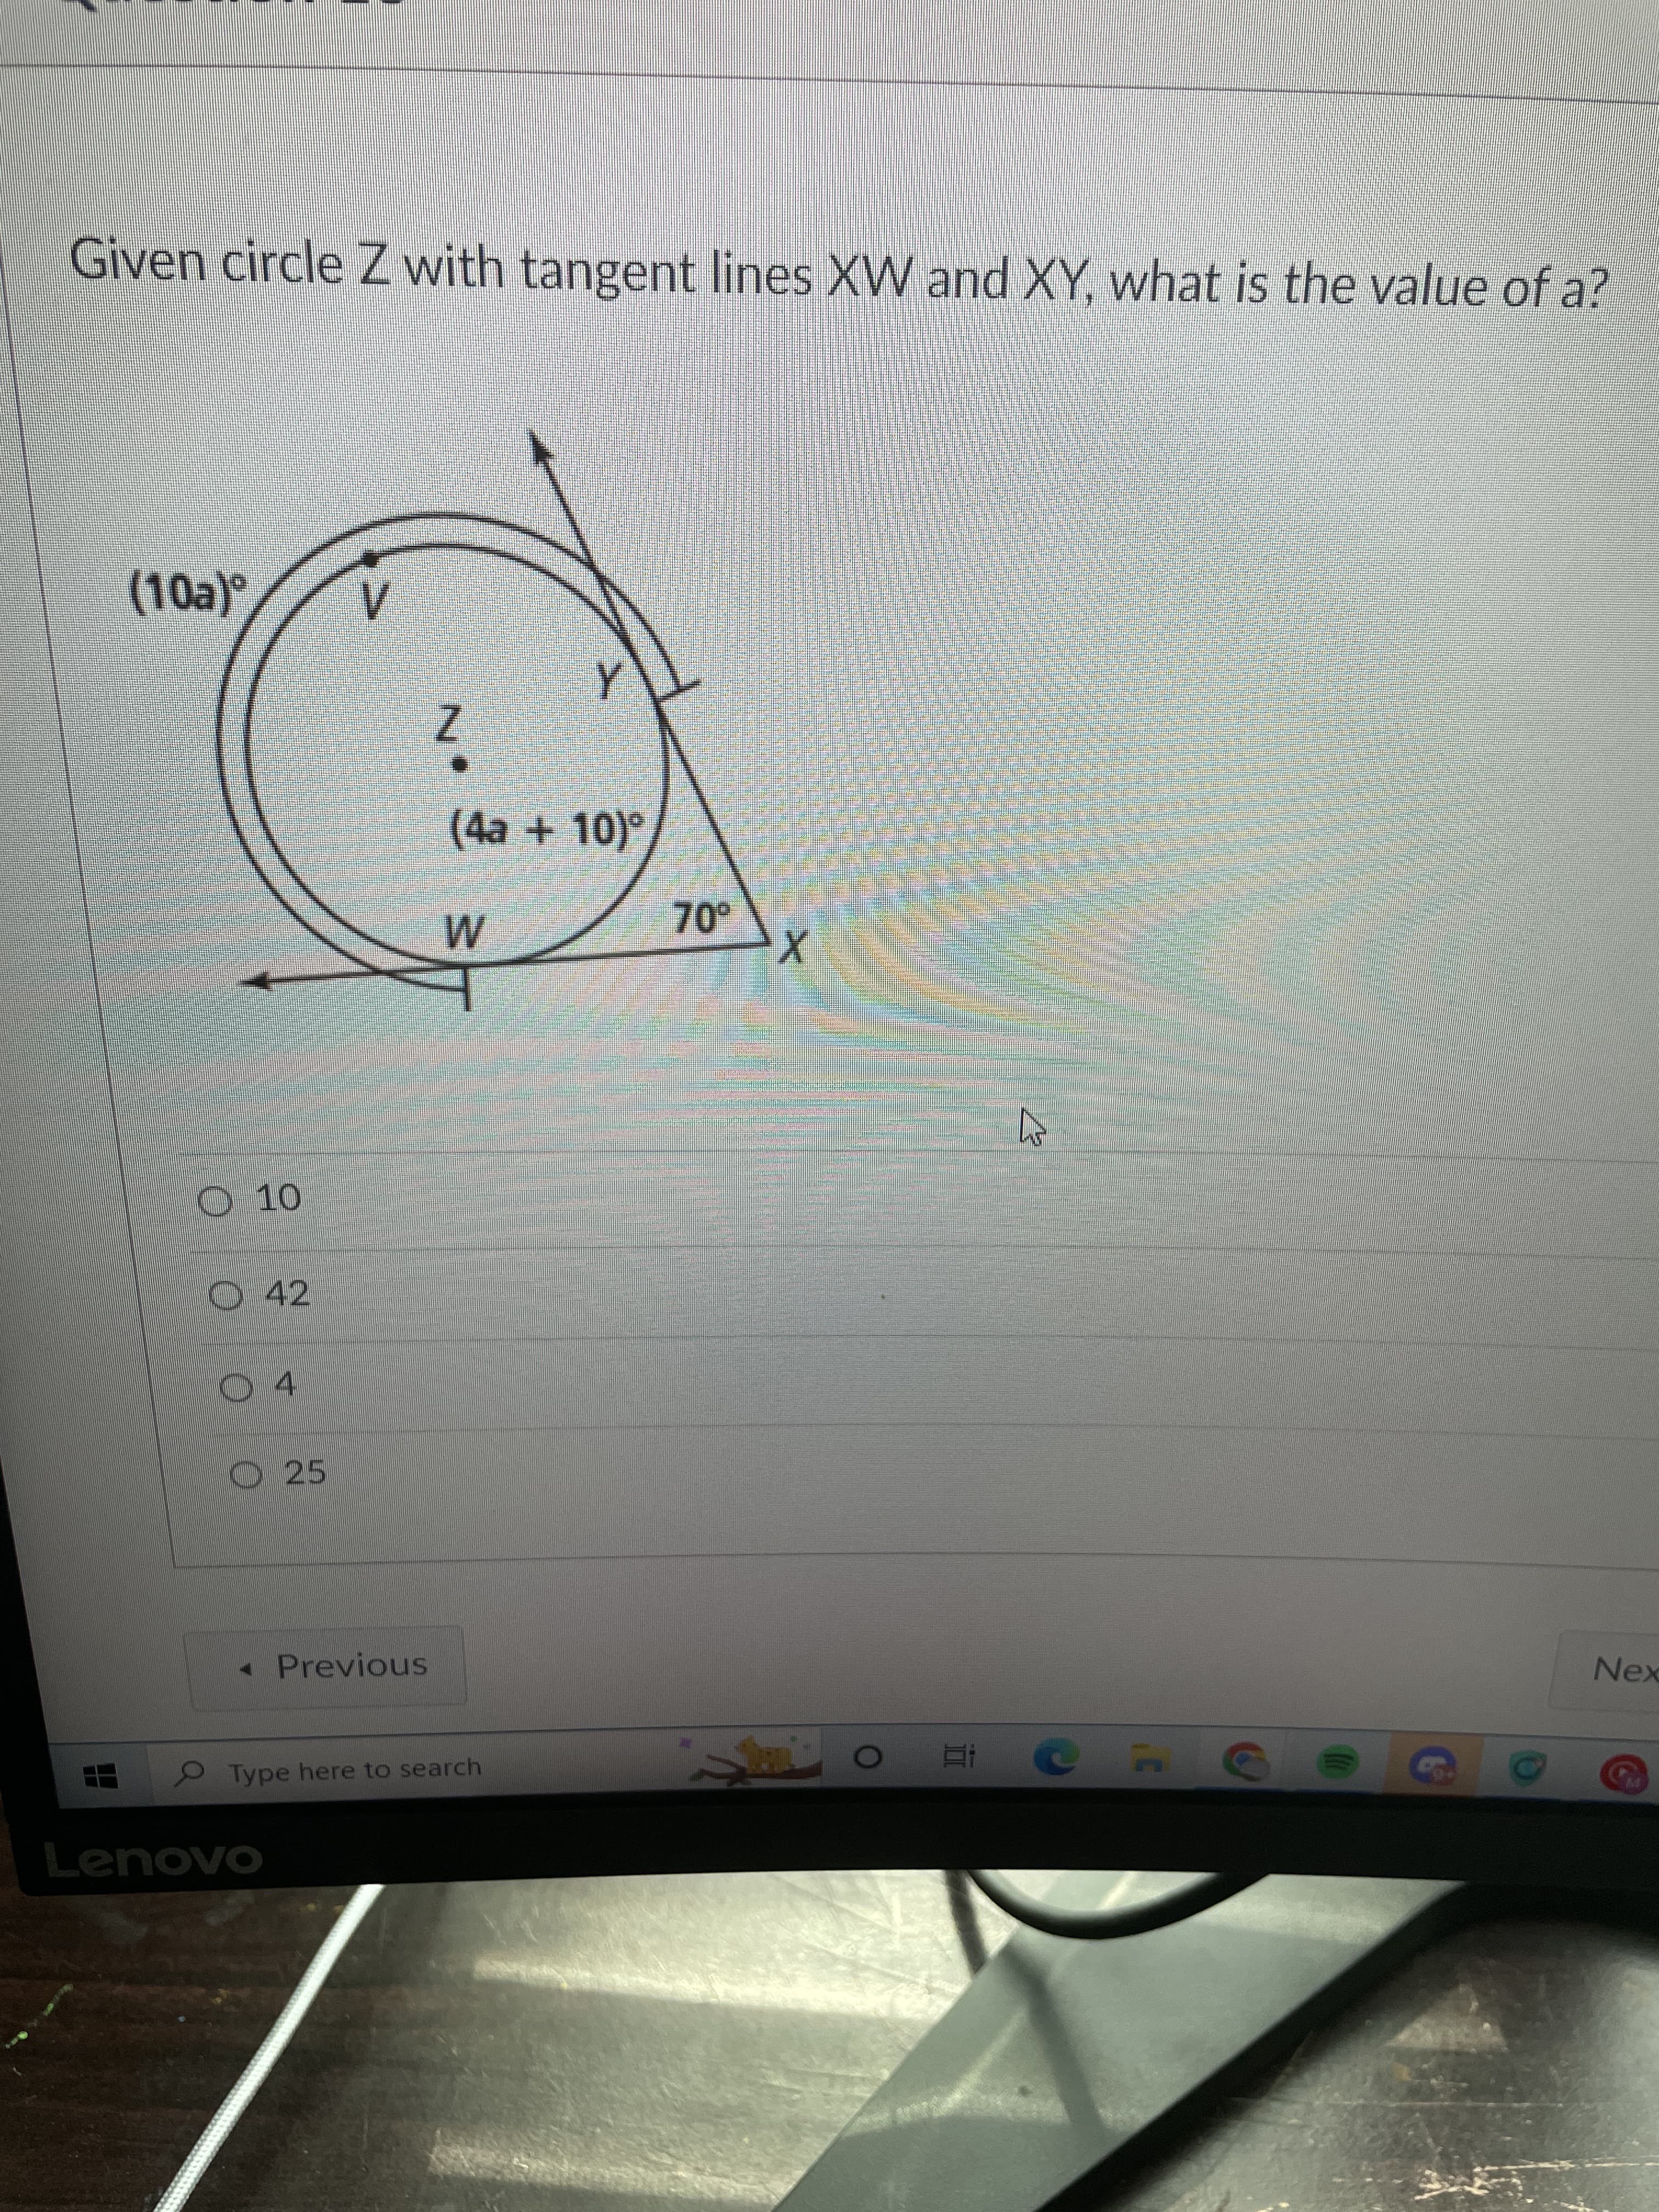 Given circle Z with tangent lines XW and XY, what is the value of a?
(10a)°
(4a+10)°
O 10
O42
O 4
O25
« Previous
Nex
Type here to search
五
